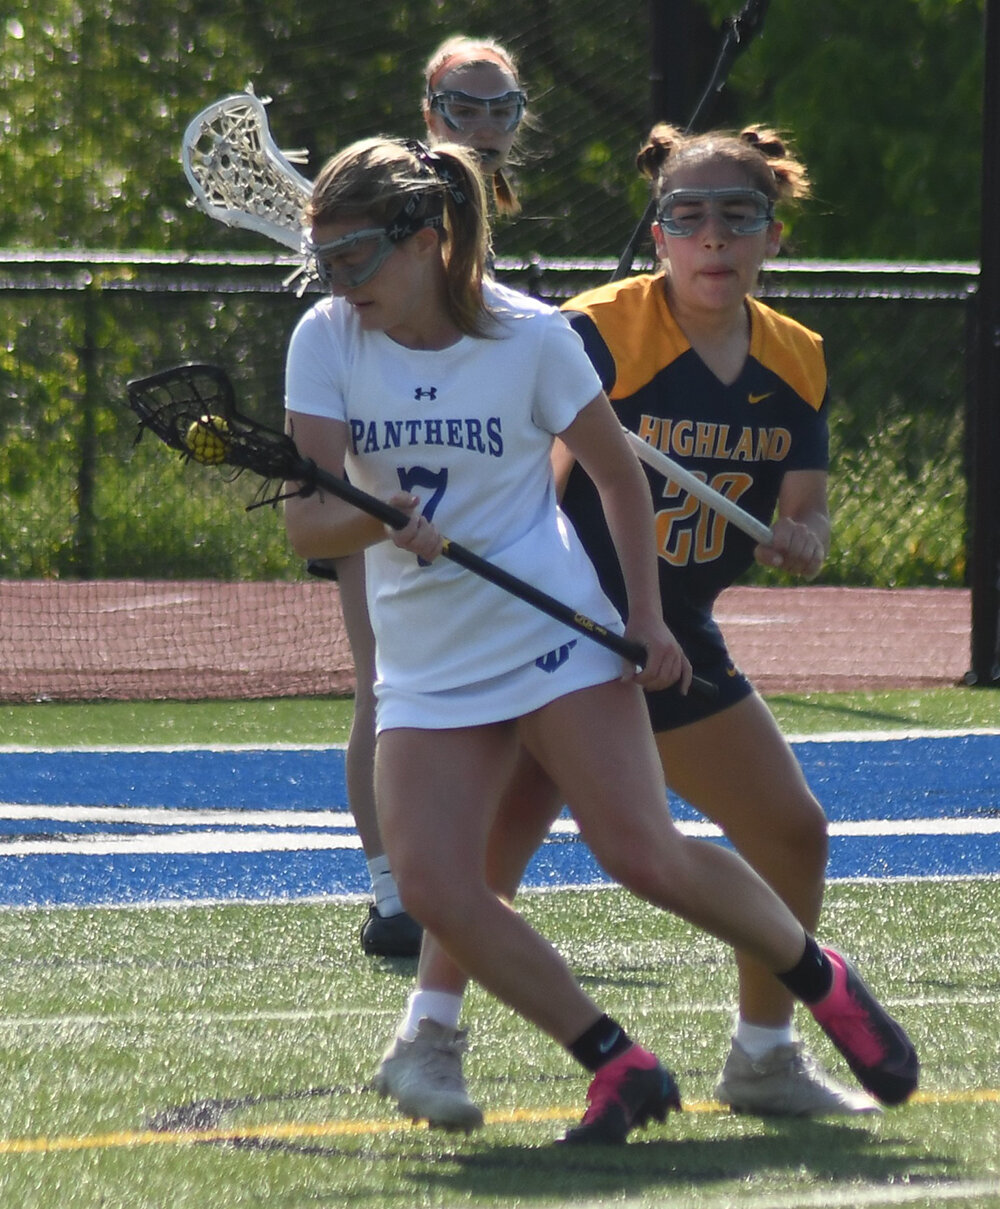 Wallkill's Emma DiLemme maneuvers around the defense of Highland's Jessica Rendon during Thursday's non-league girls' lacrosse game at Wallkill High School.